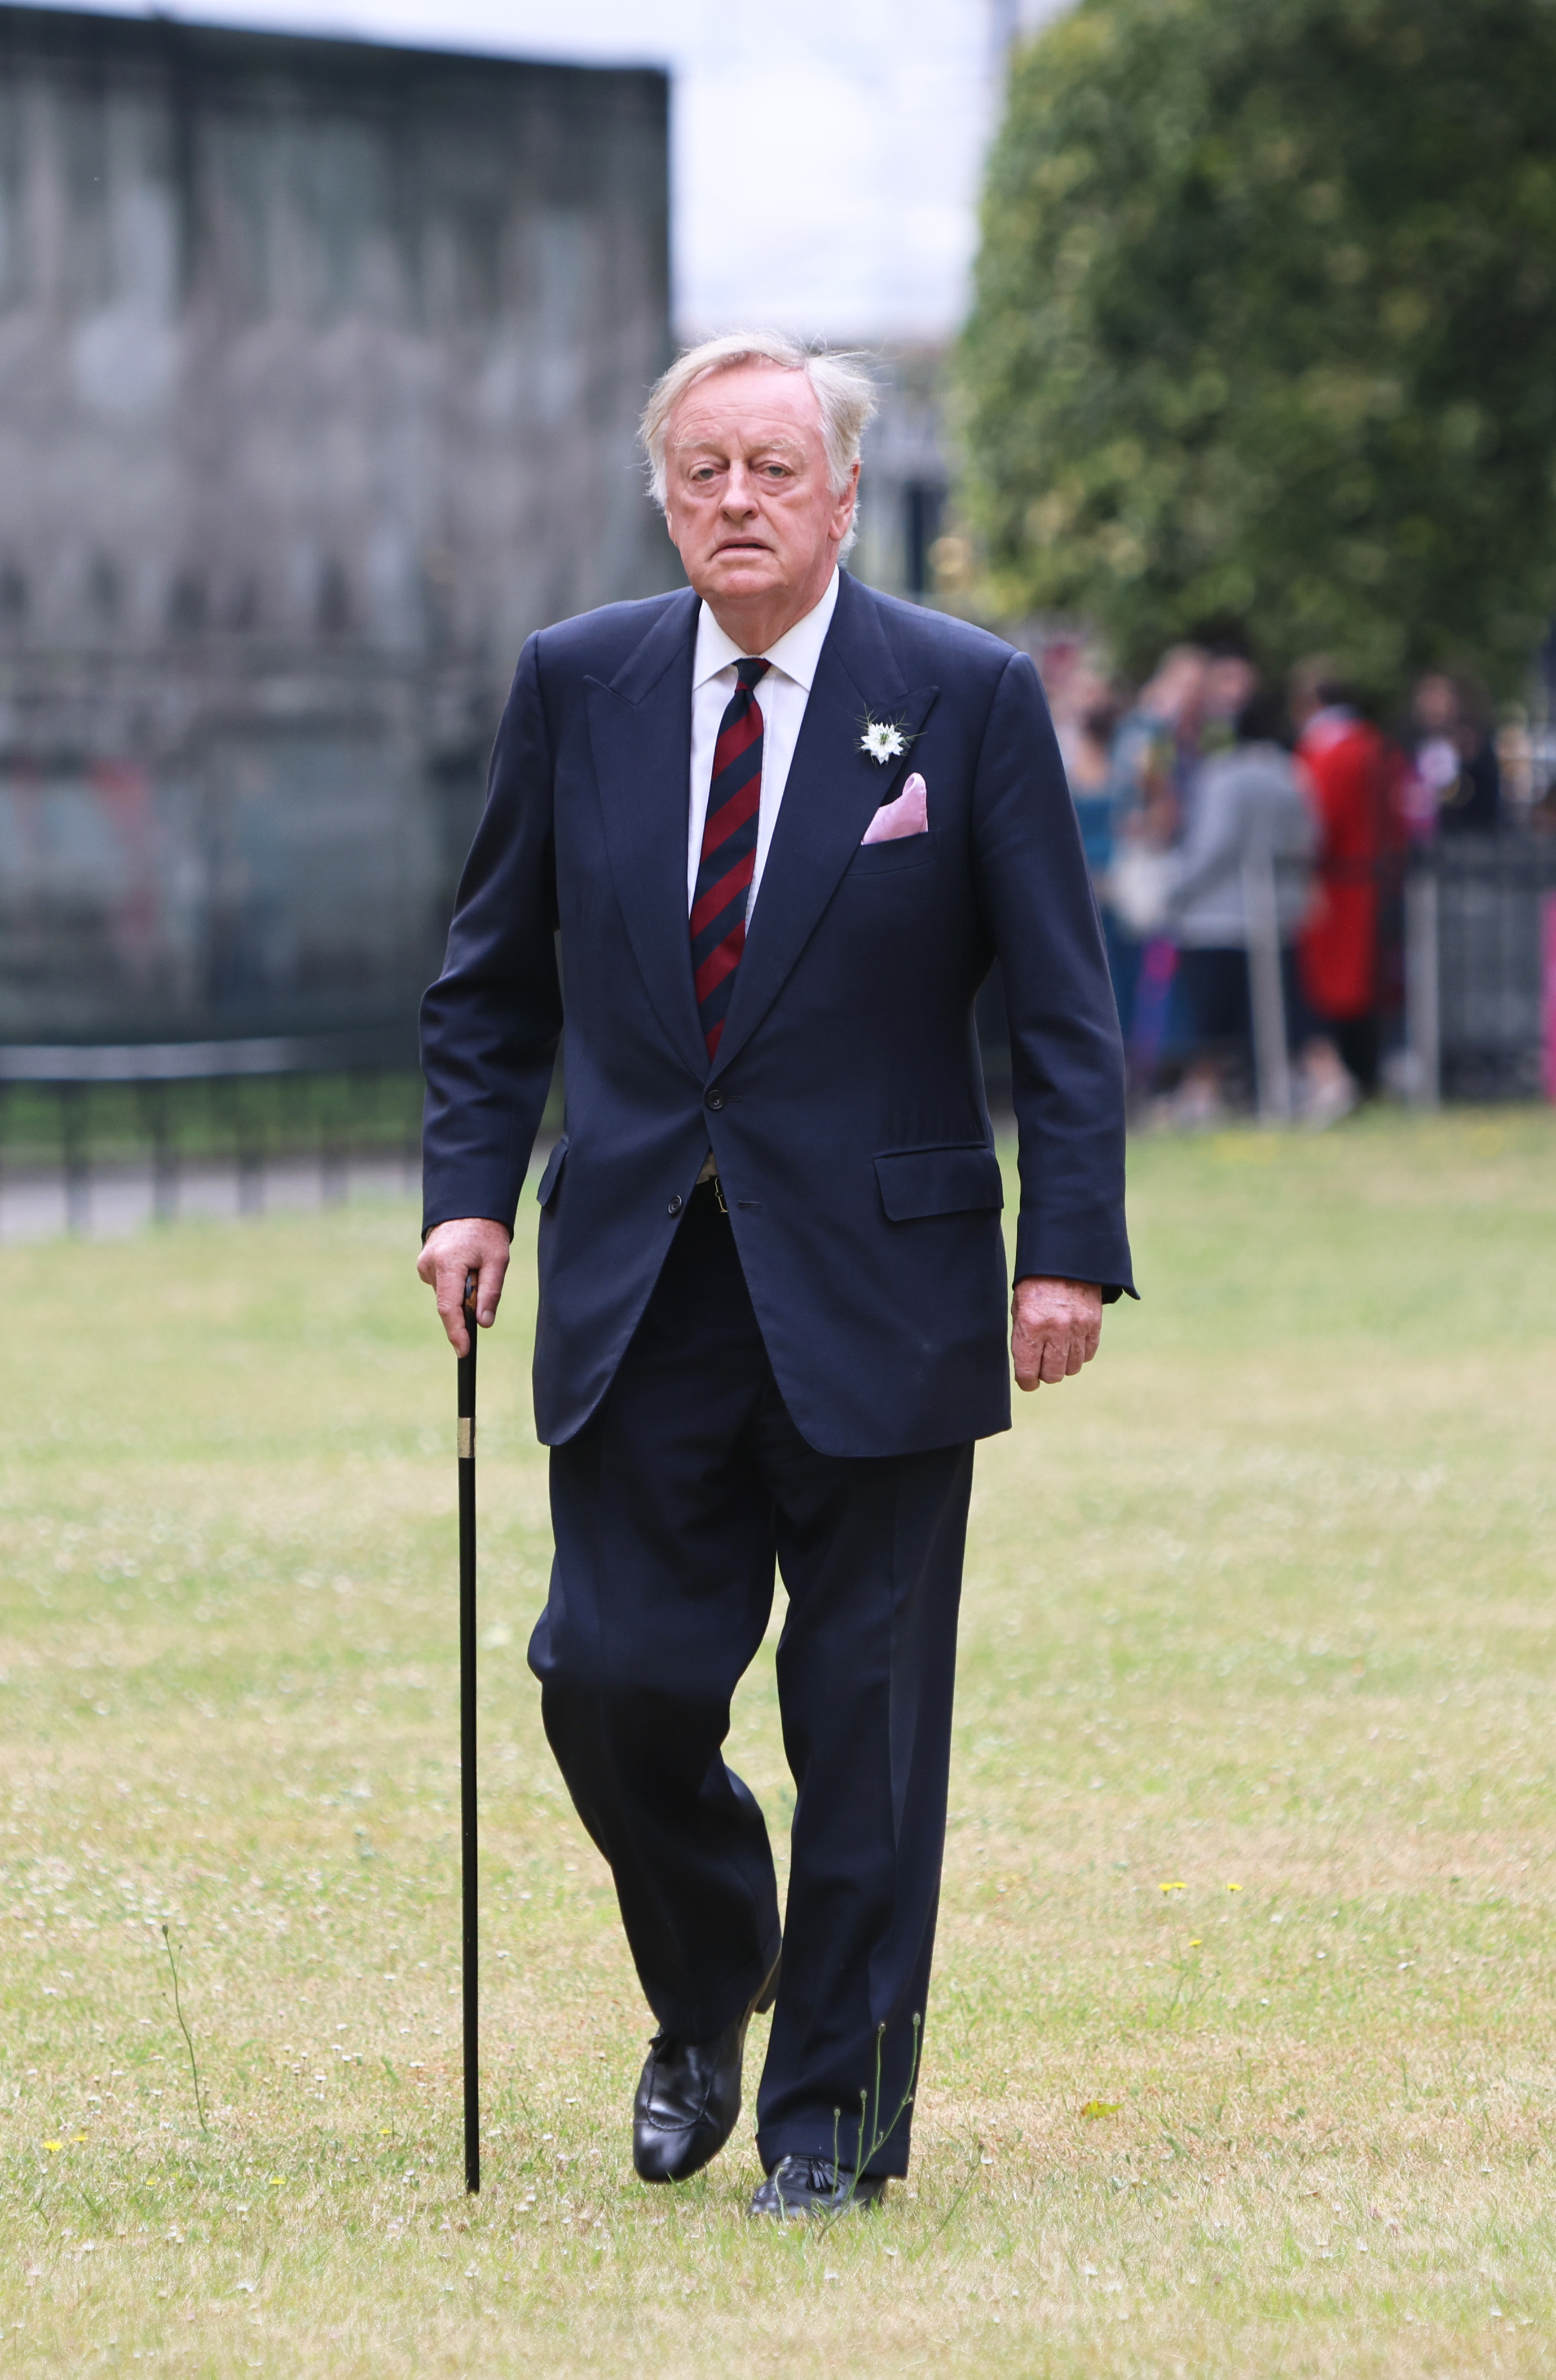 Andrew Parker Bowles arrives at Westminster Abbey for the service of celebration in memory of The Lady Elizabeth Shakerley CVO, in London, England, on June 23, 2022. | Source: Getty Images